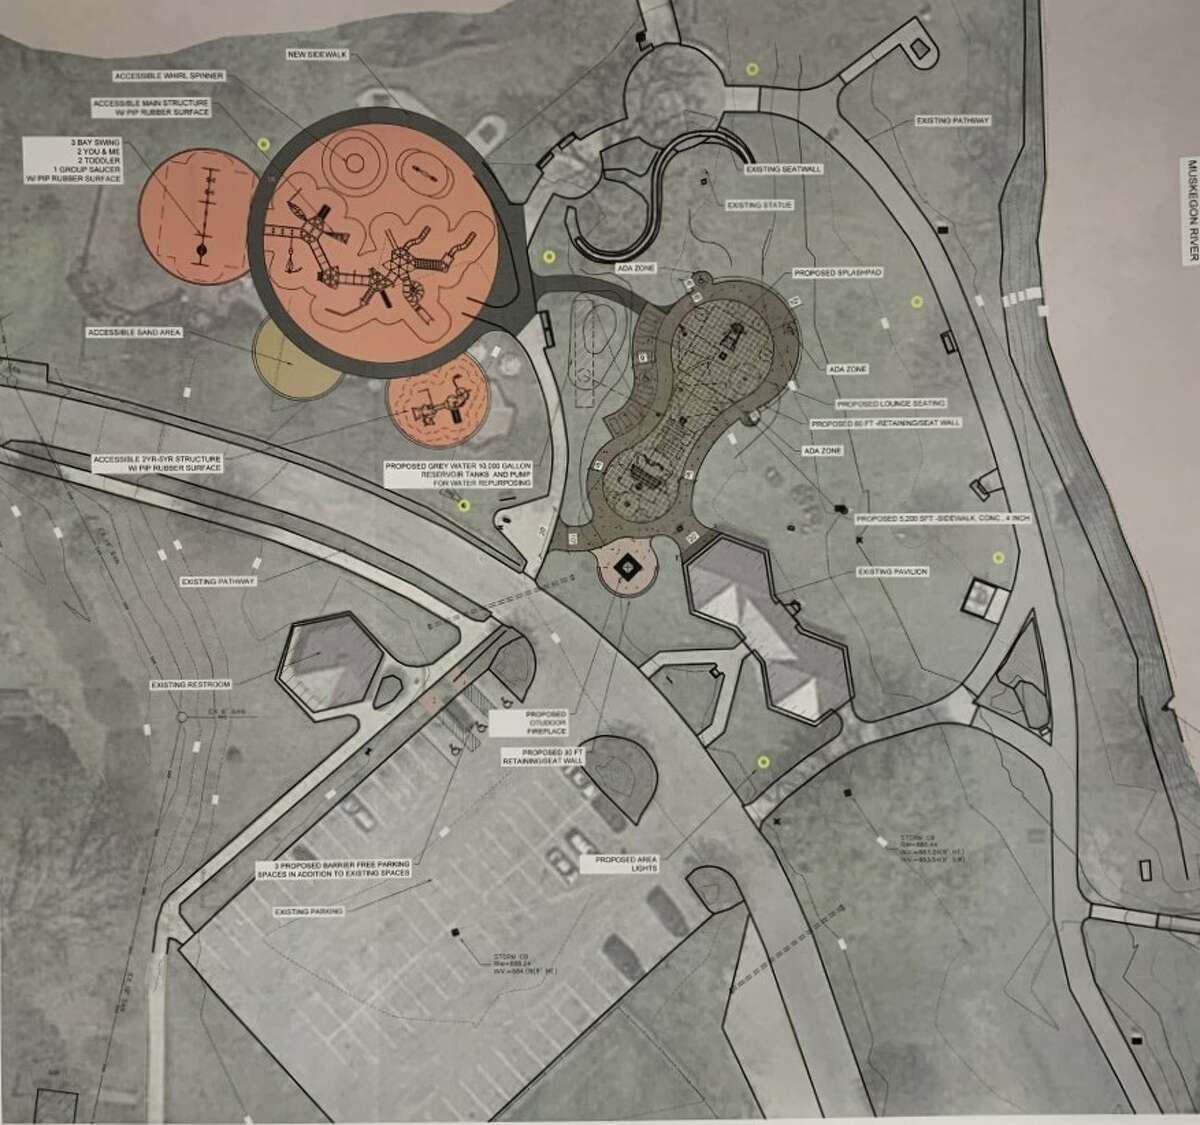 Tentative plans for a splash pad and new playscape at Hemlock Park show a circular area for the playscape with additional features around it, and a figure-eight splash pad with a separate are for younger children and another area for older children.